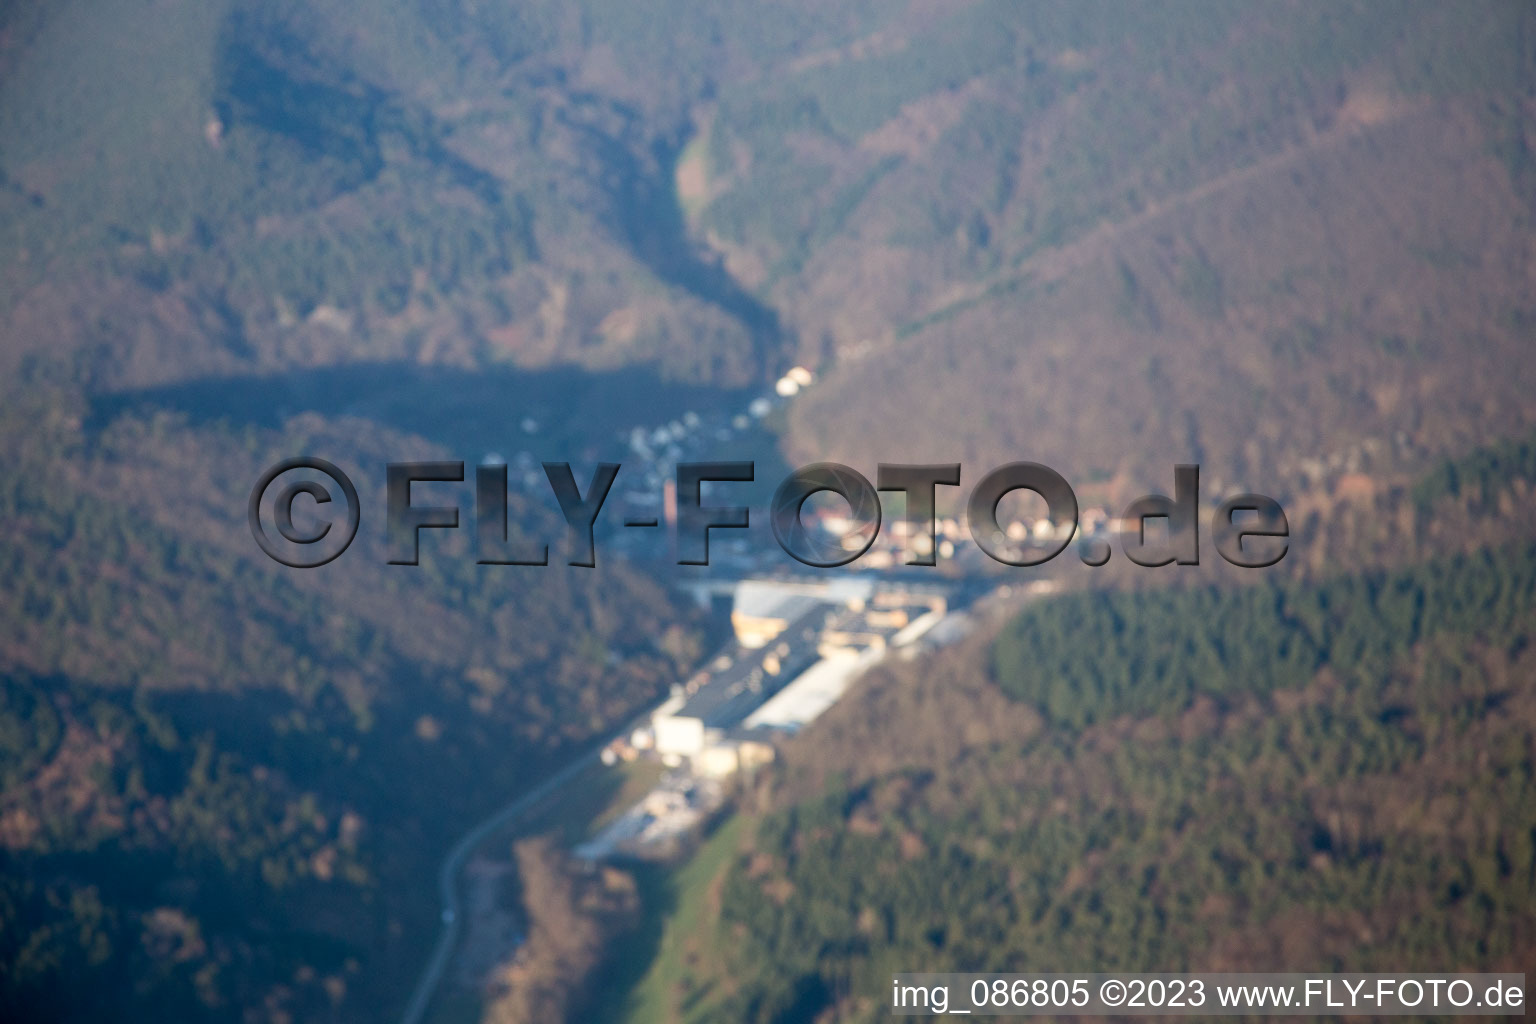 Bird's eye view of Rinnthal in the state Rhineland-Palatinate, Germany